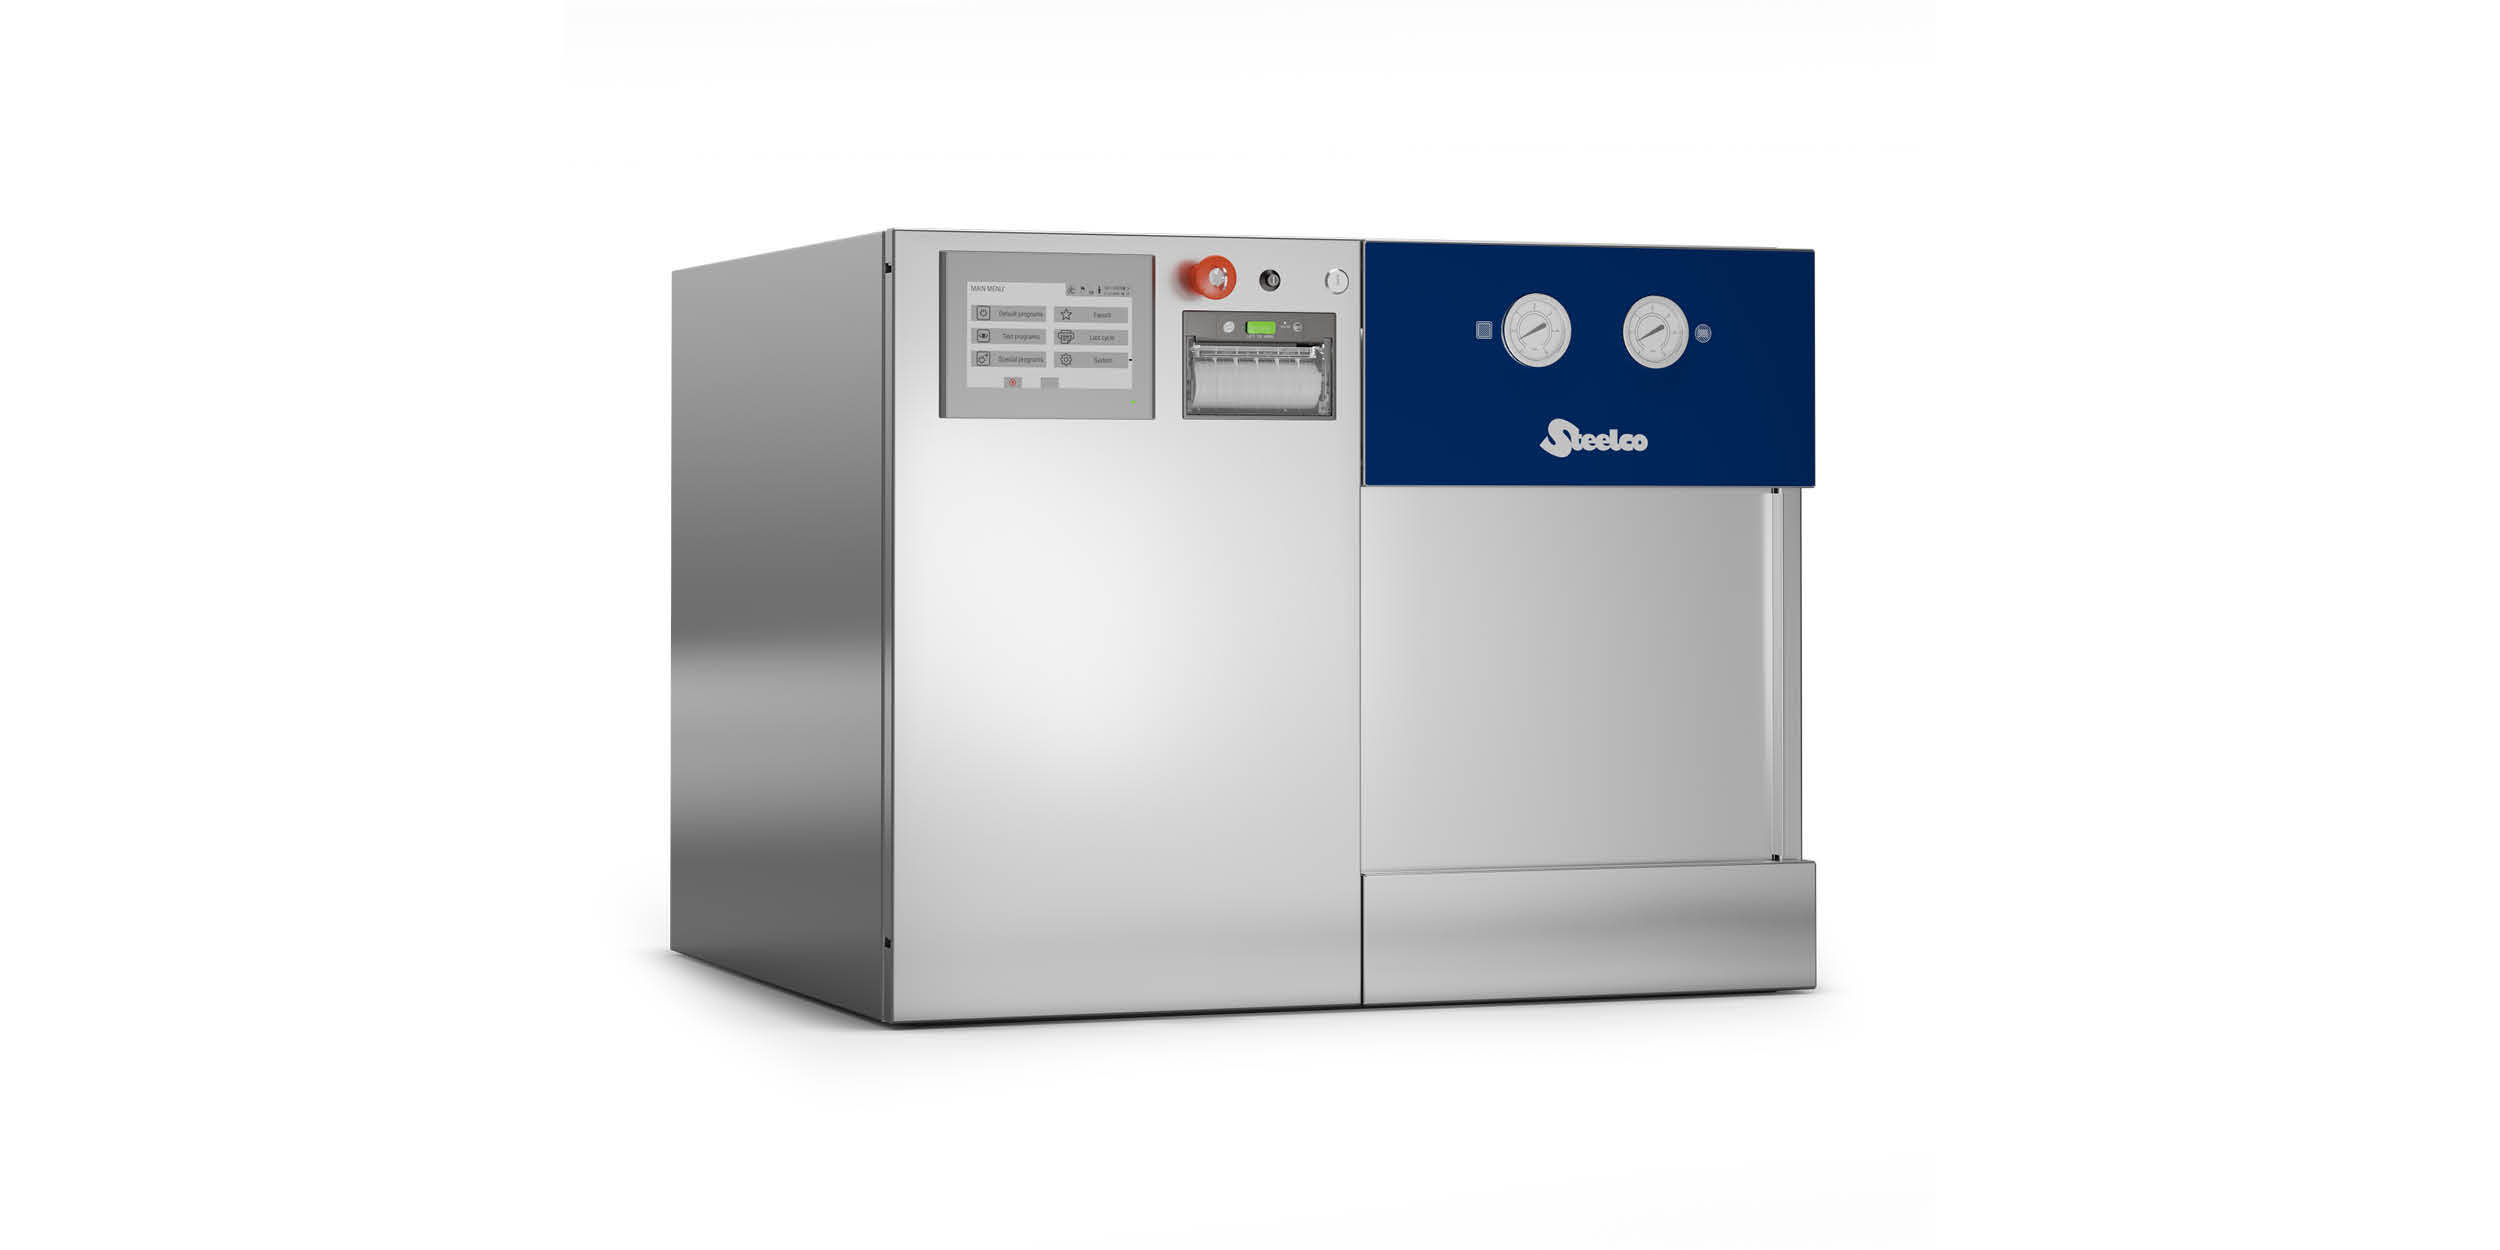 VS 1 TT Compact Autoclave From Steelco